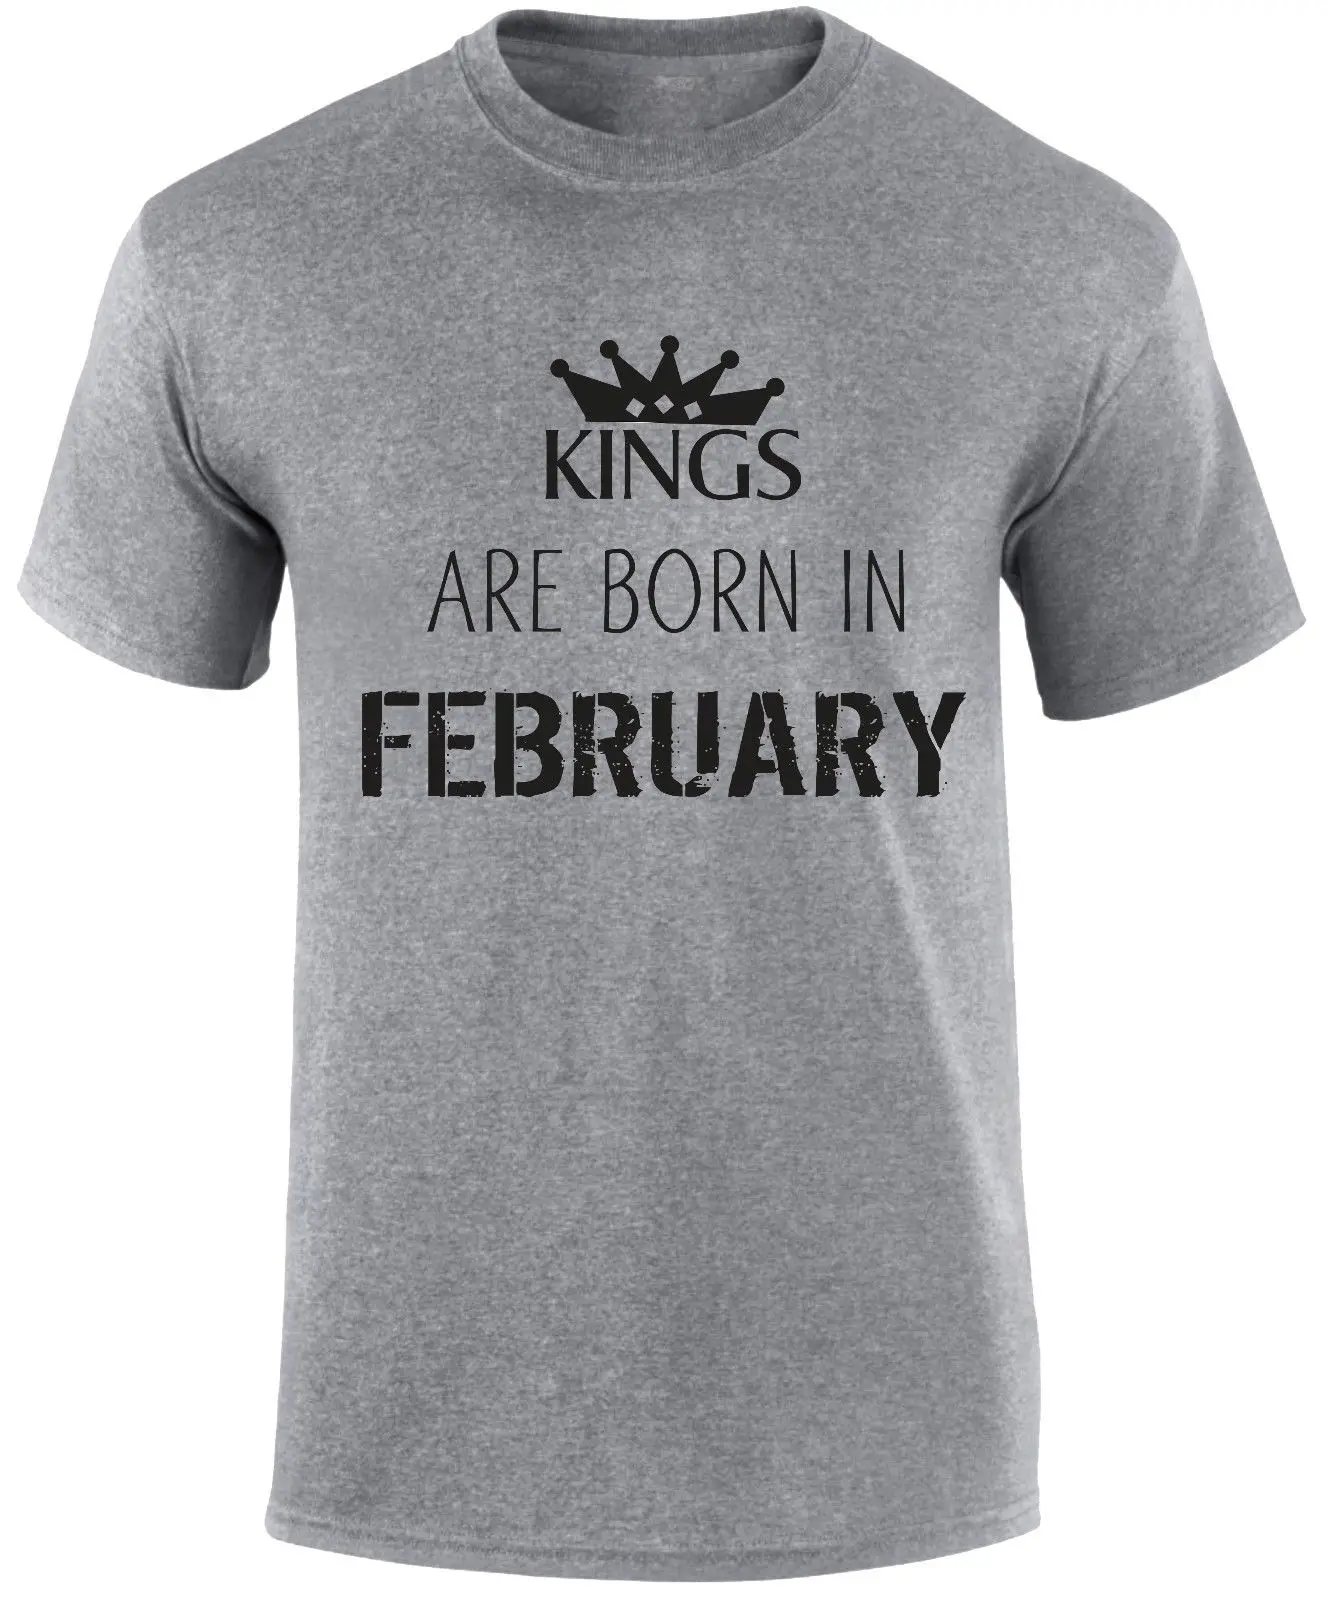 

Fashion Men T Shirt Free Shipping Kings Are Born In February Birthday Month of Birth Royalty Party Slogan T Shirt Summer T-shirt